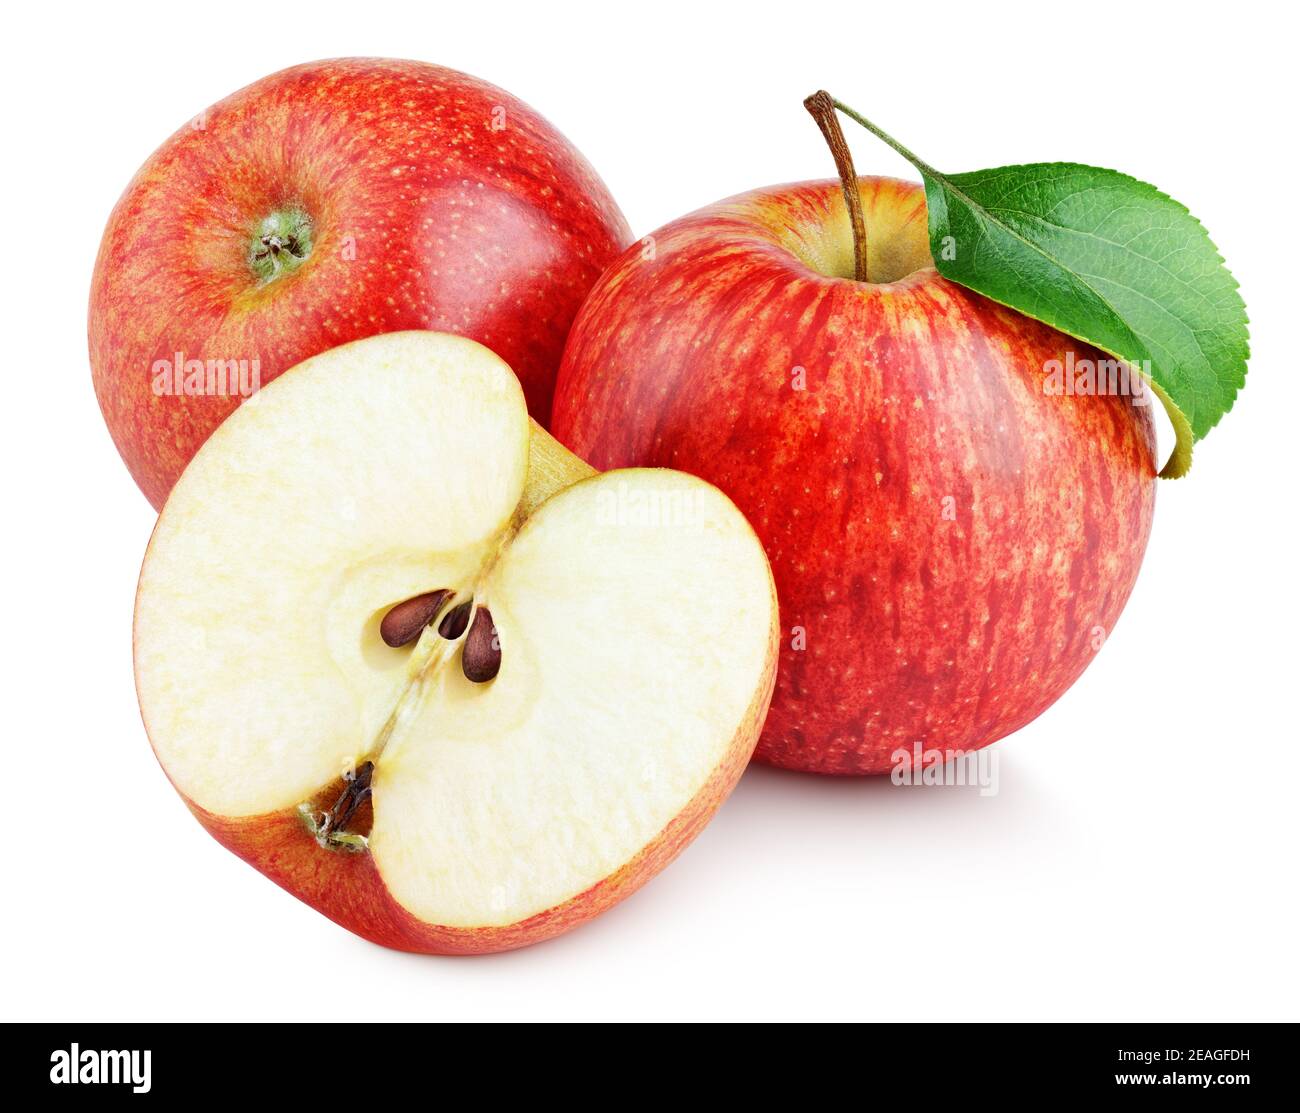 Ripe red apple fruit with apple half and apple leaf isolated on white background. Red apples and leaf with clipping path Stock Photo